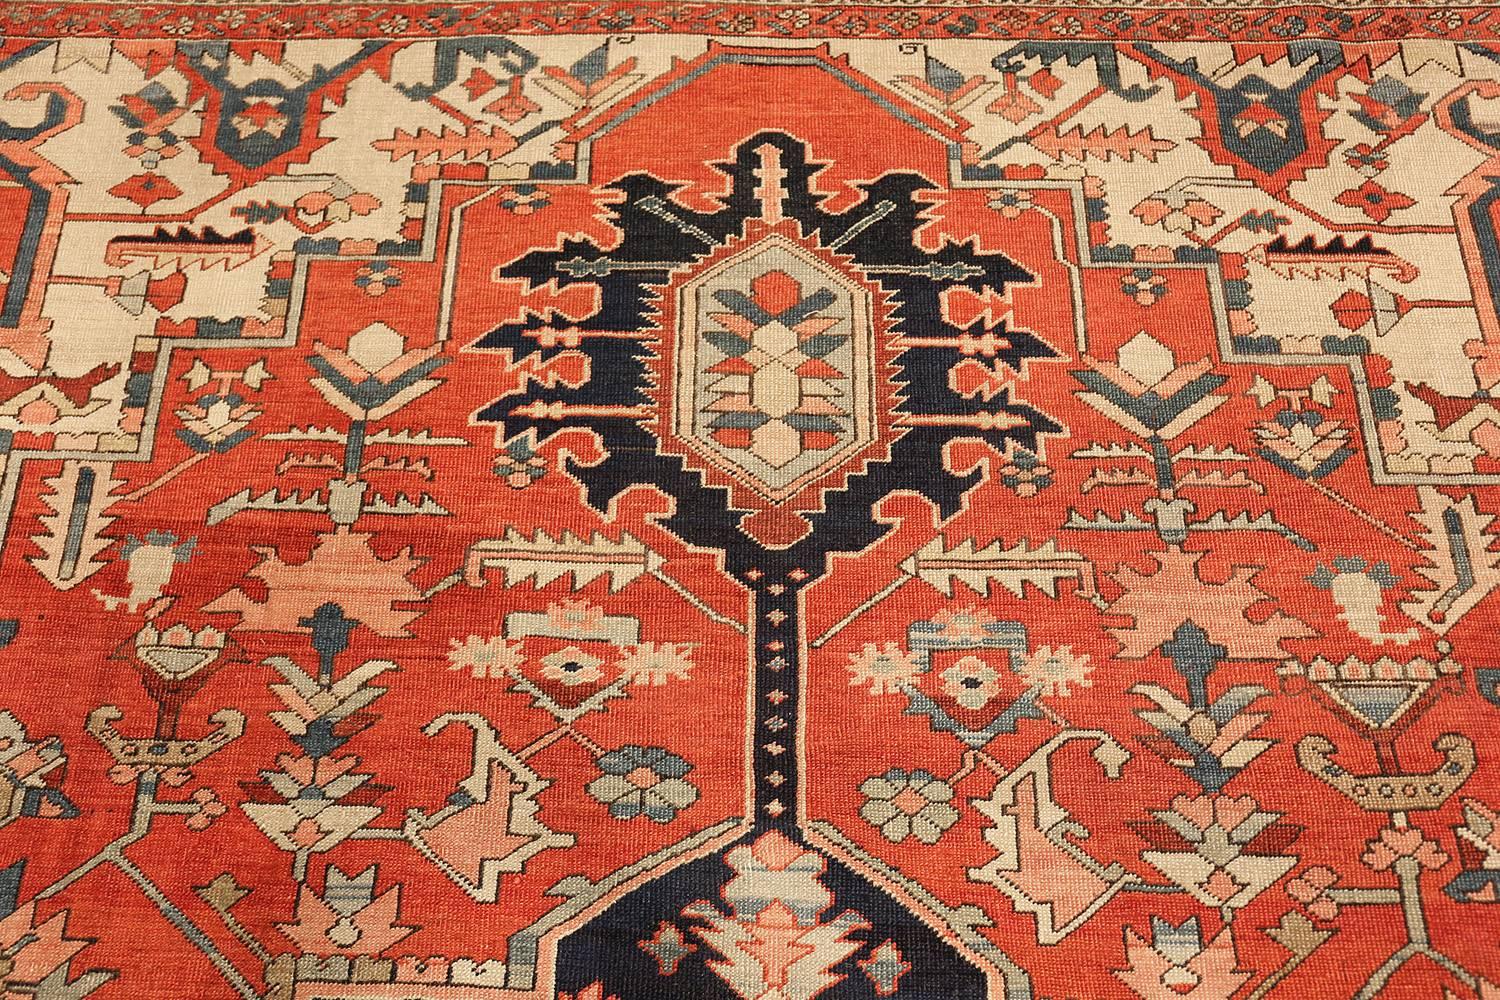 Hand-Knotted Antique Serapi Persian Rug. Size: 10 ft 4 in x 13 ft 6 in (3.15 m x 4.11 m)